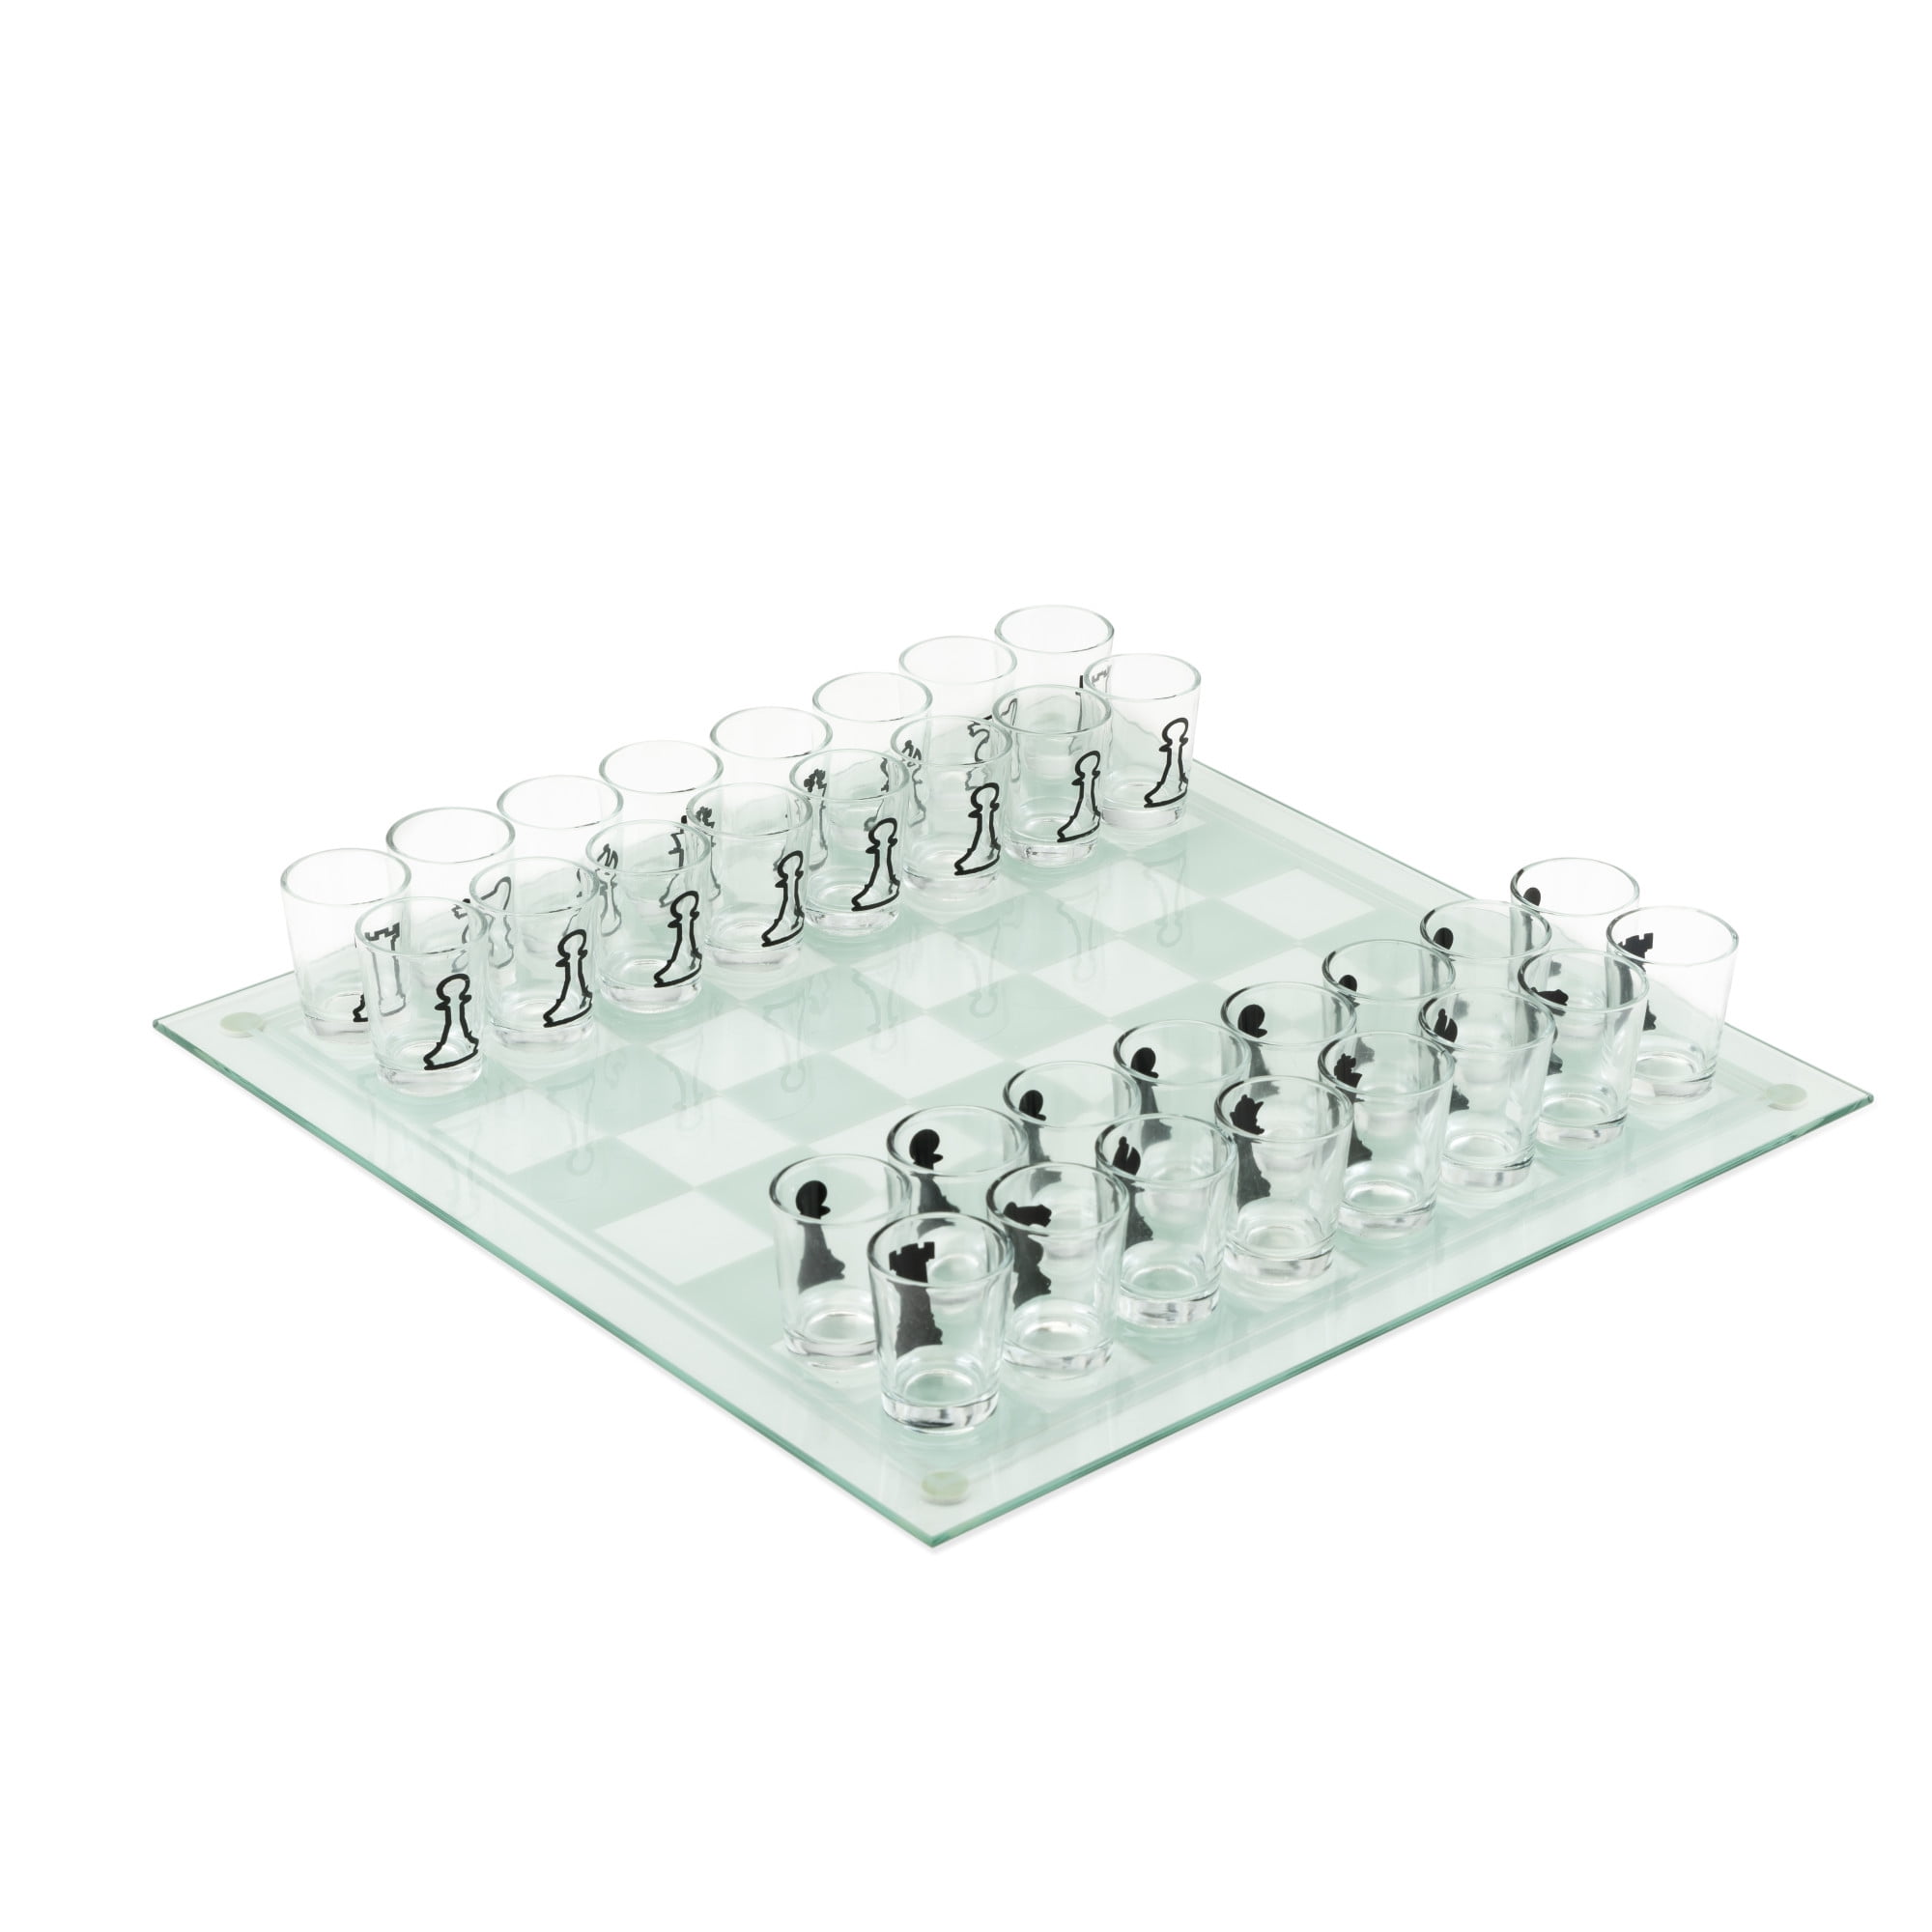 Chess, Chess club, Chess funny gift, I love chess funny gift